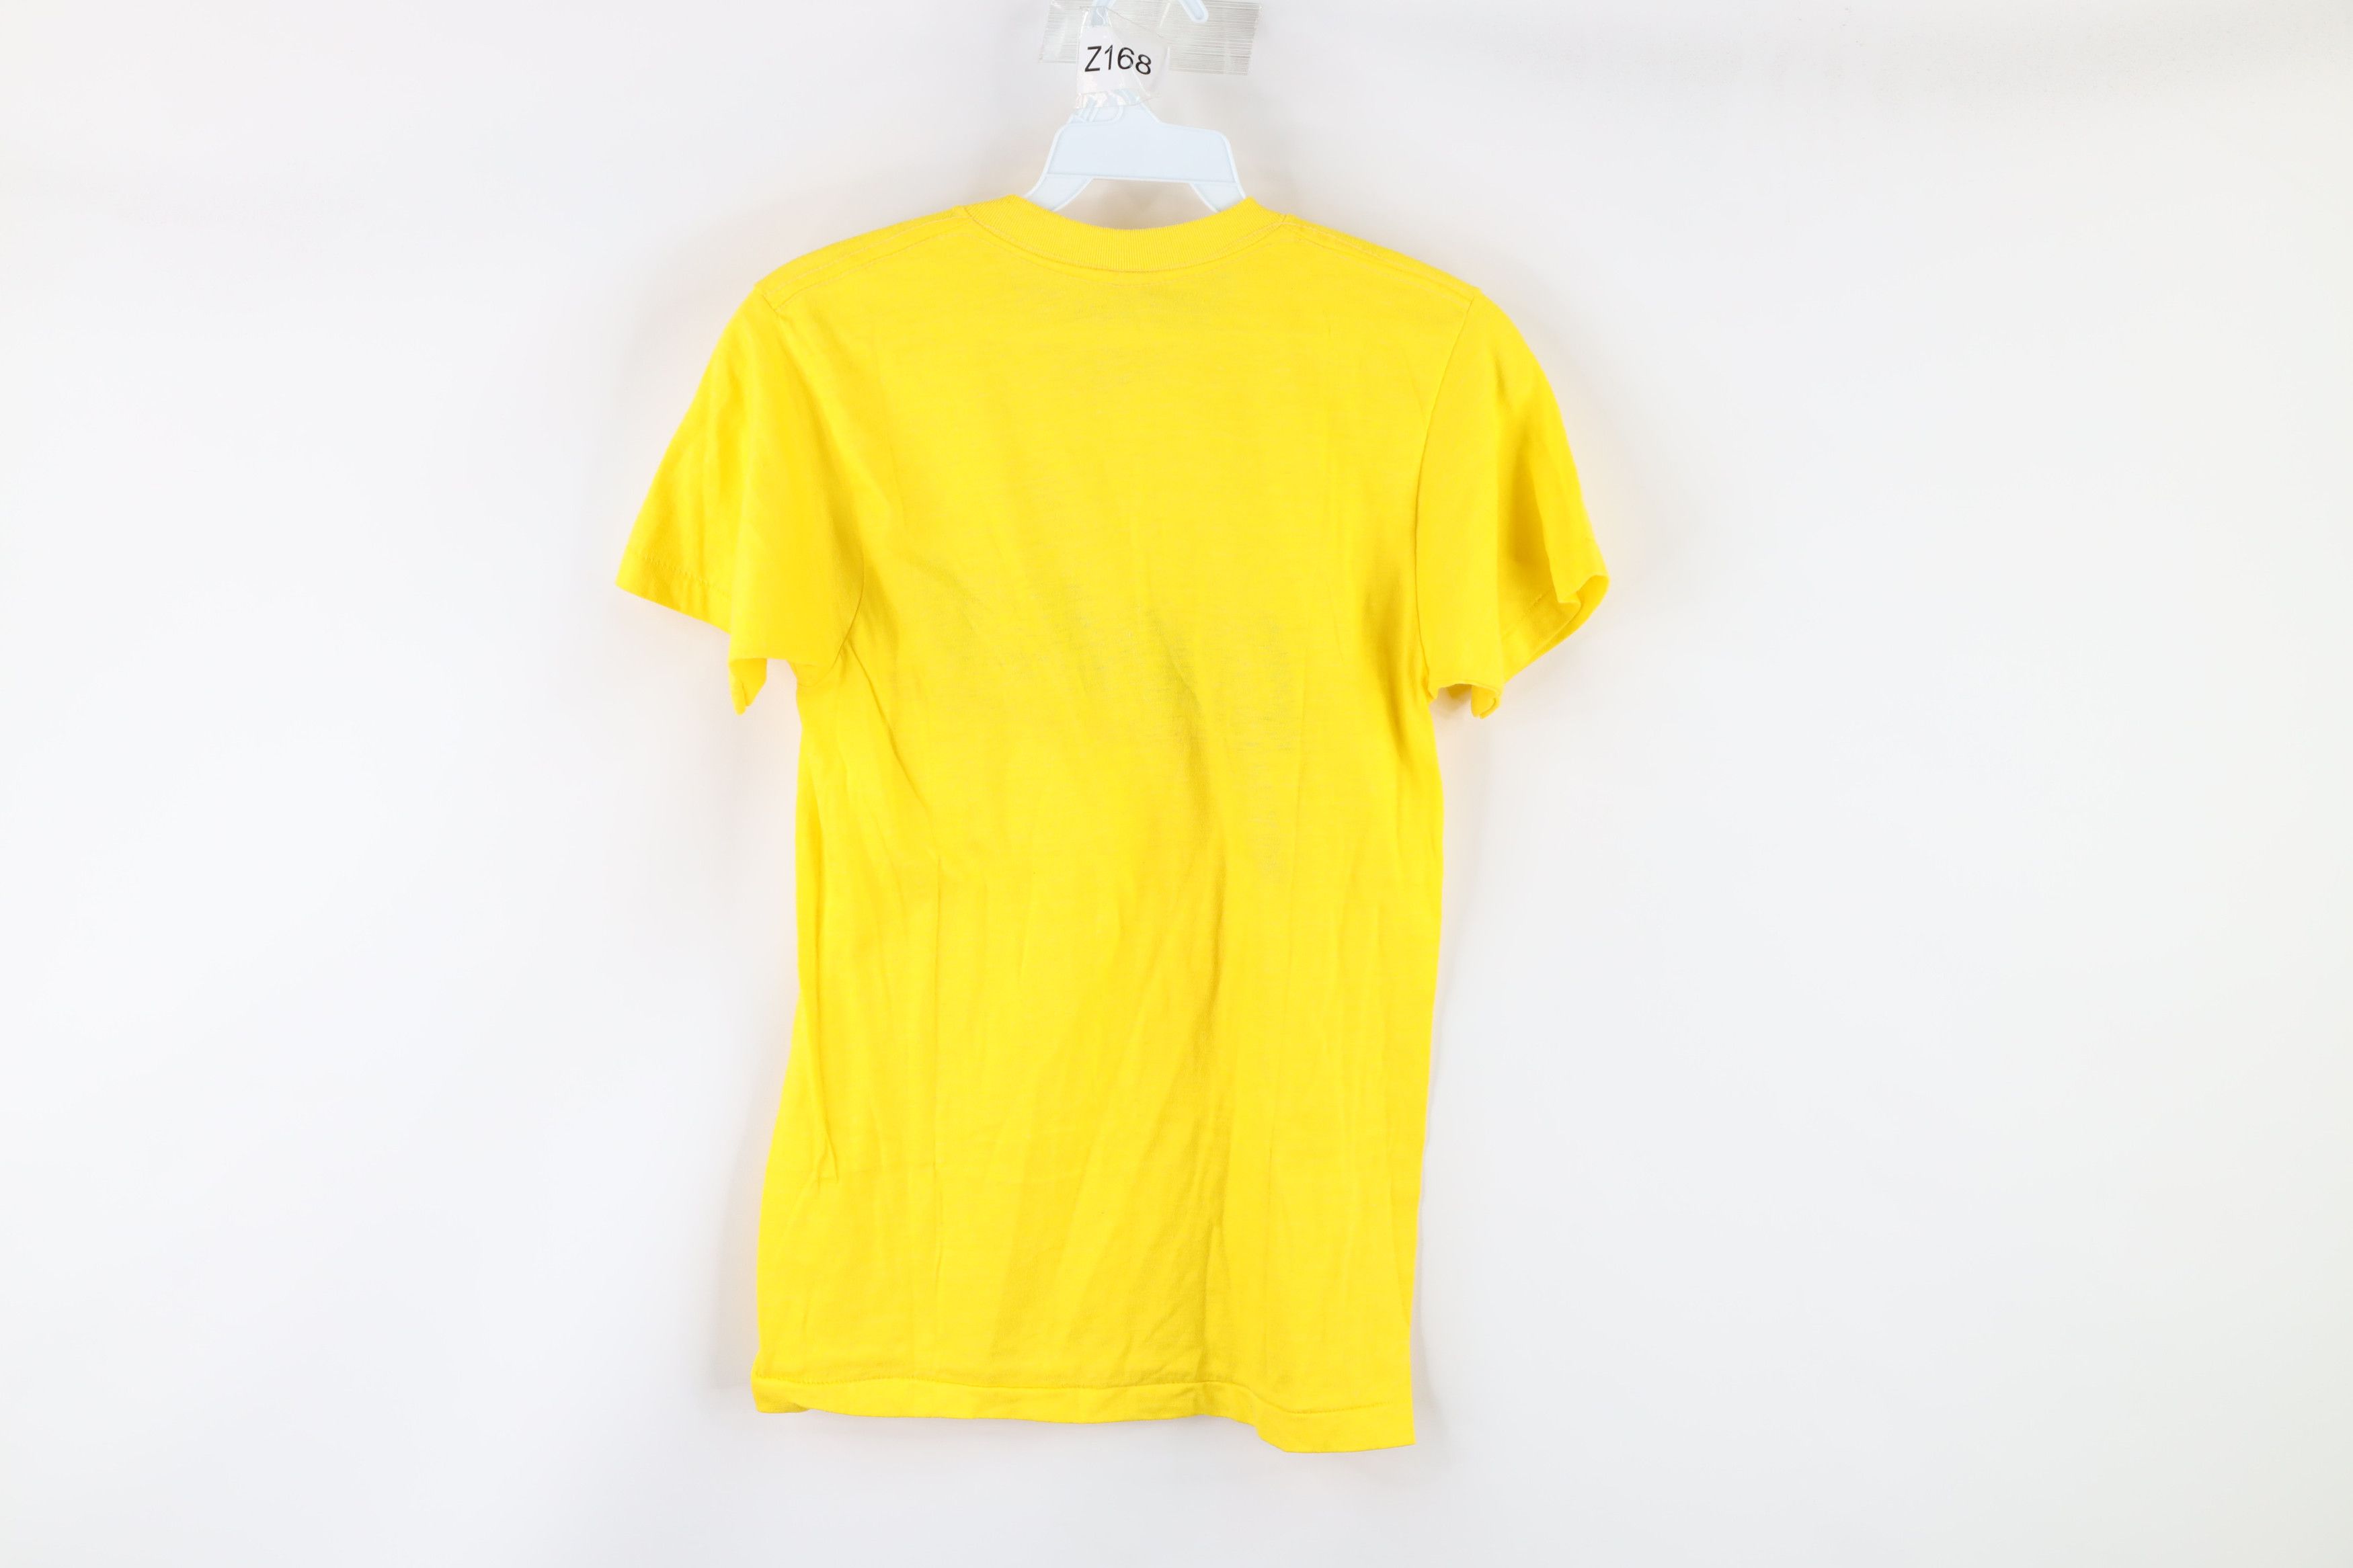 Vintage Vintage 80s YooHoo Chocolate Drink Out T-Shirt Yellow USA Size S / US 4 / IT 40 - 6 Thumbnail